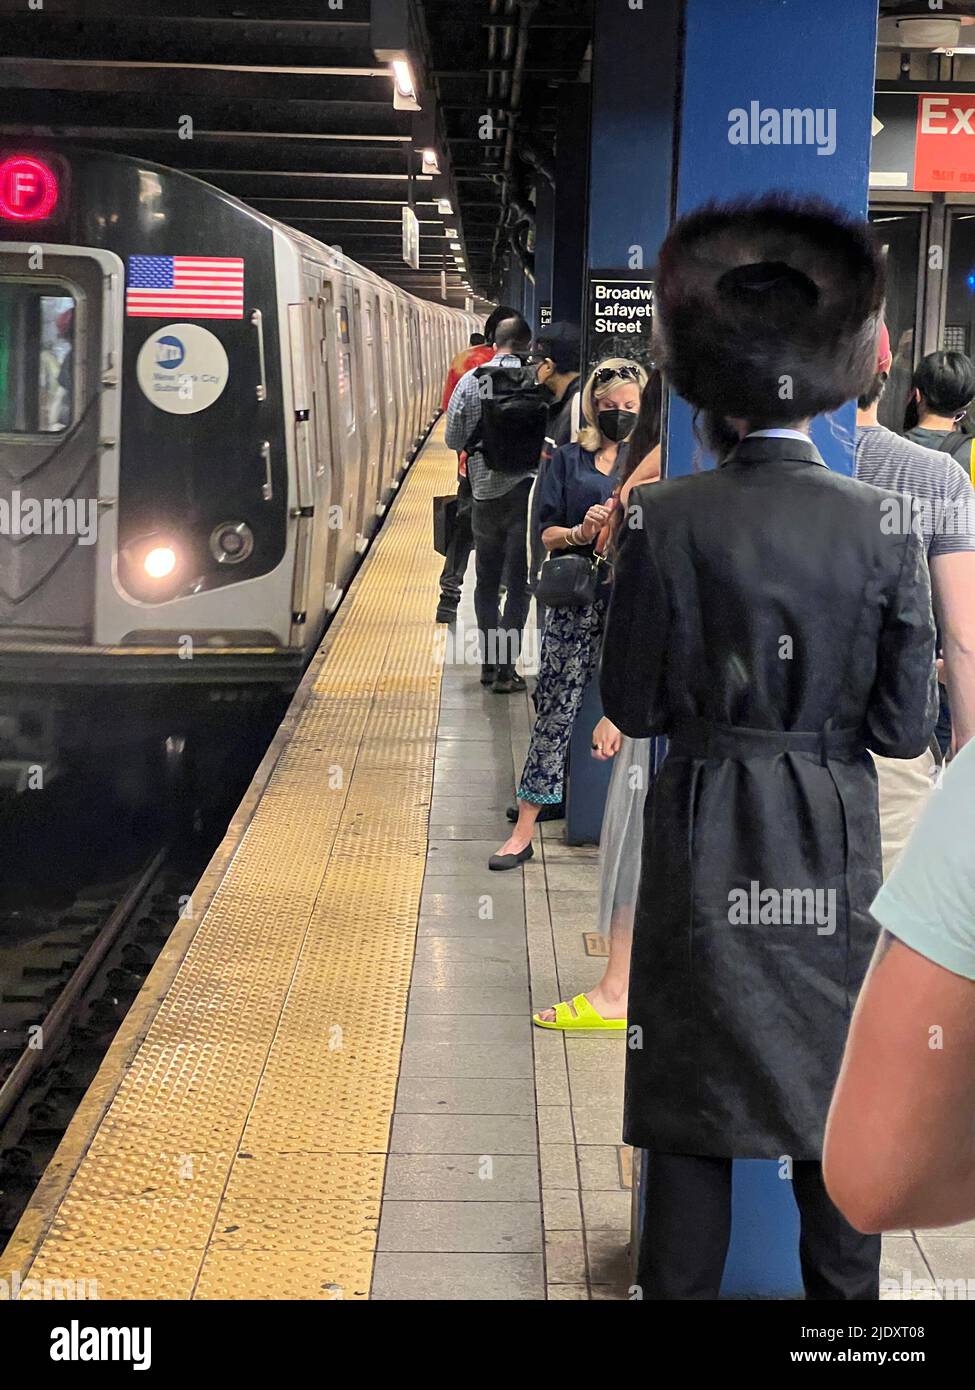 Religious orthodox Jewish man waits for a Brooklyn bound F train at the Broadway Lafayette subway station in Manhattan, New York City. Stock Photo